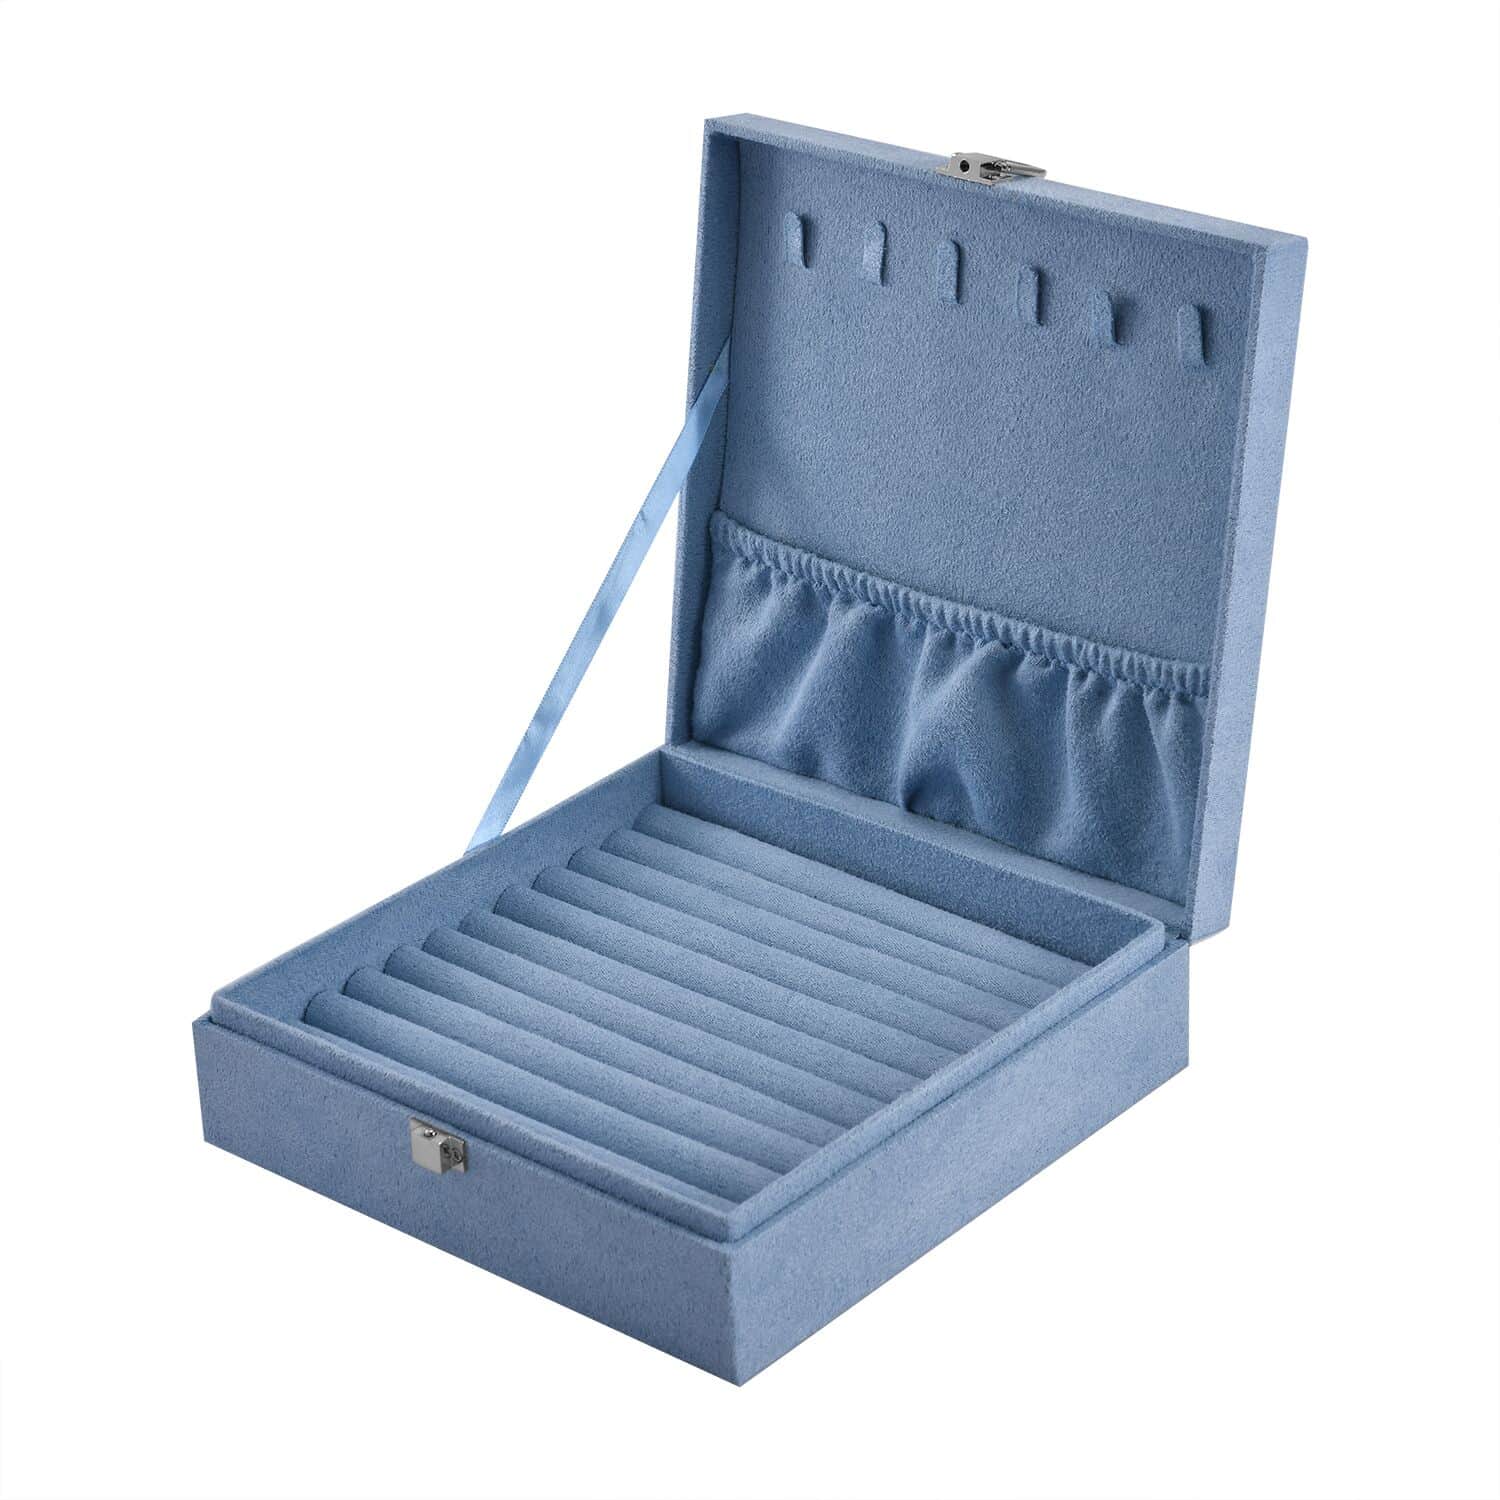 Buy Turquoise Blue Velvet Jewelry Box with Latch Clasp (11 Ring